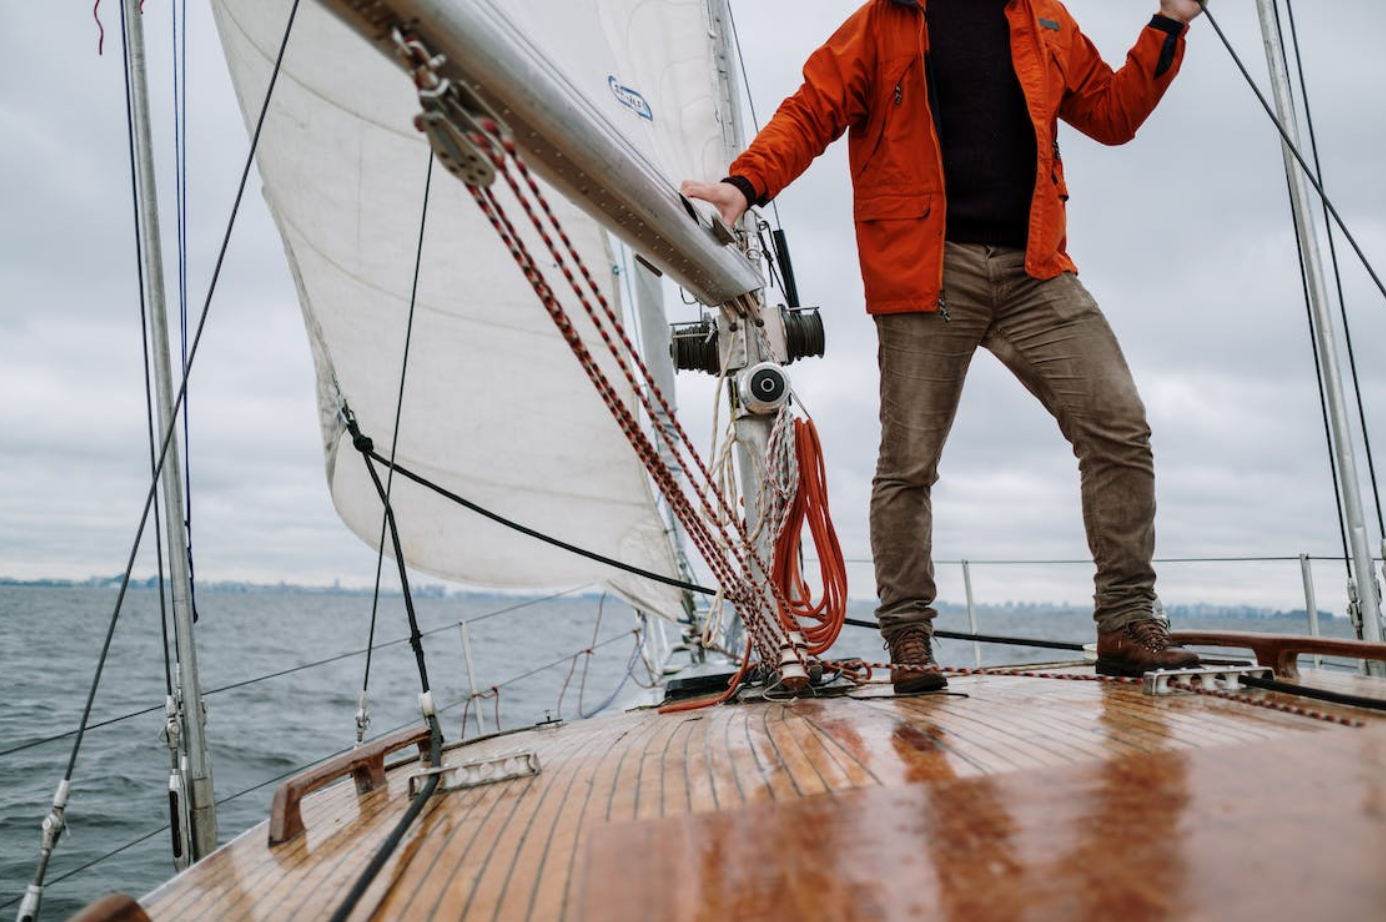 Man on deck of sailboat on the water; image by Cottonbro Studio, via Pexels.com.